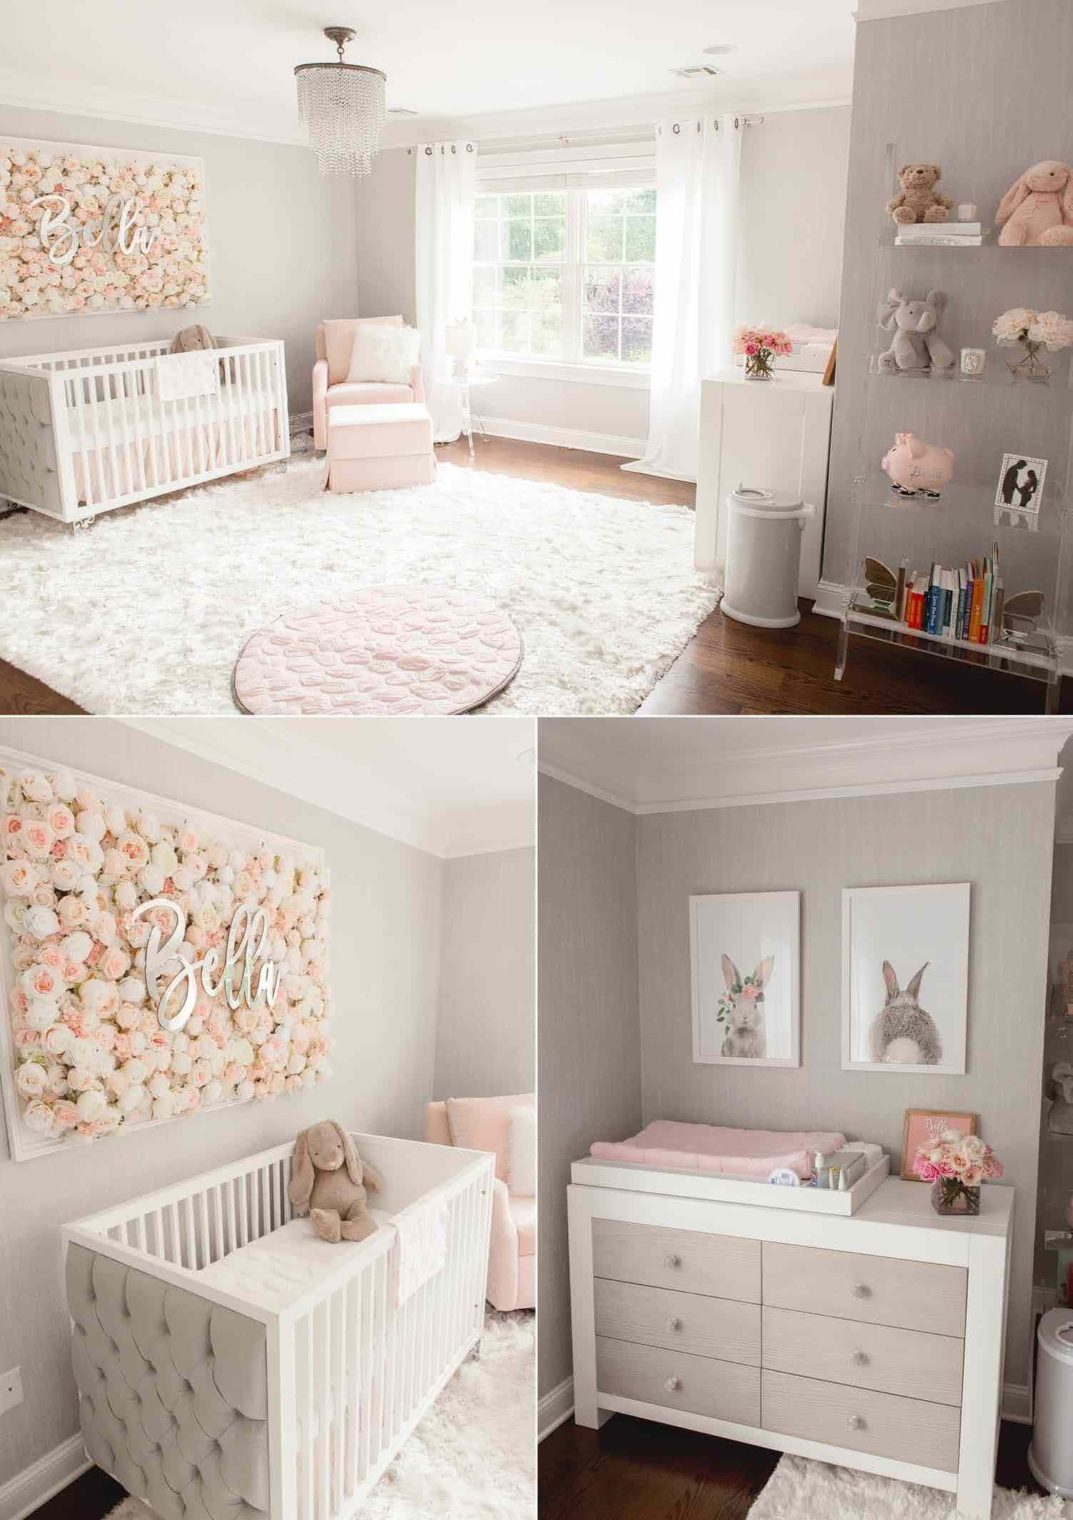 How to create the perfect nursery for your baby on a budget